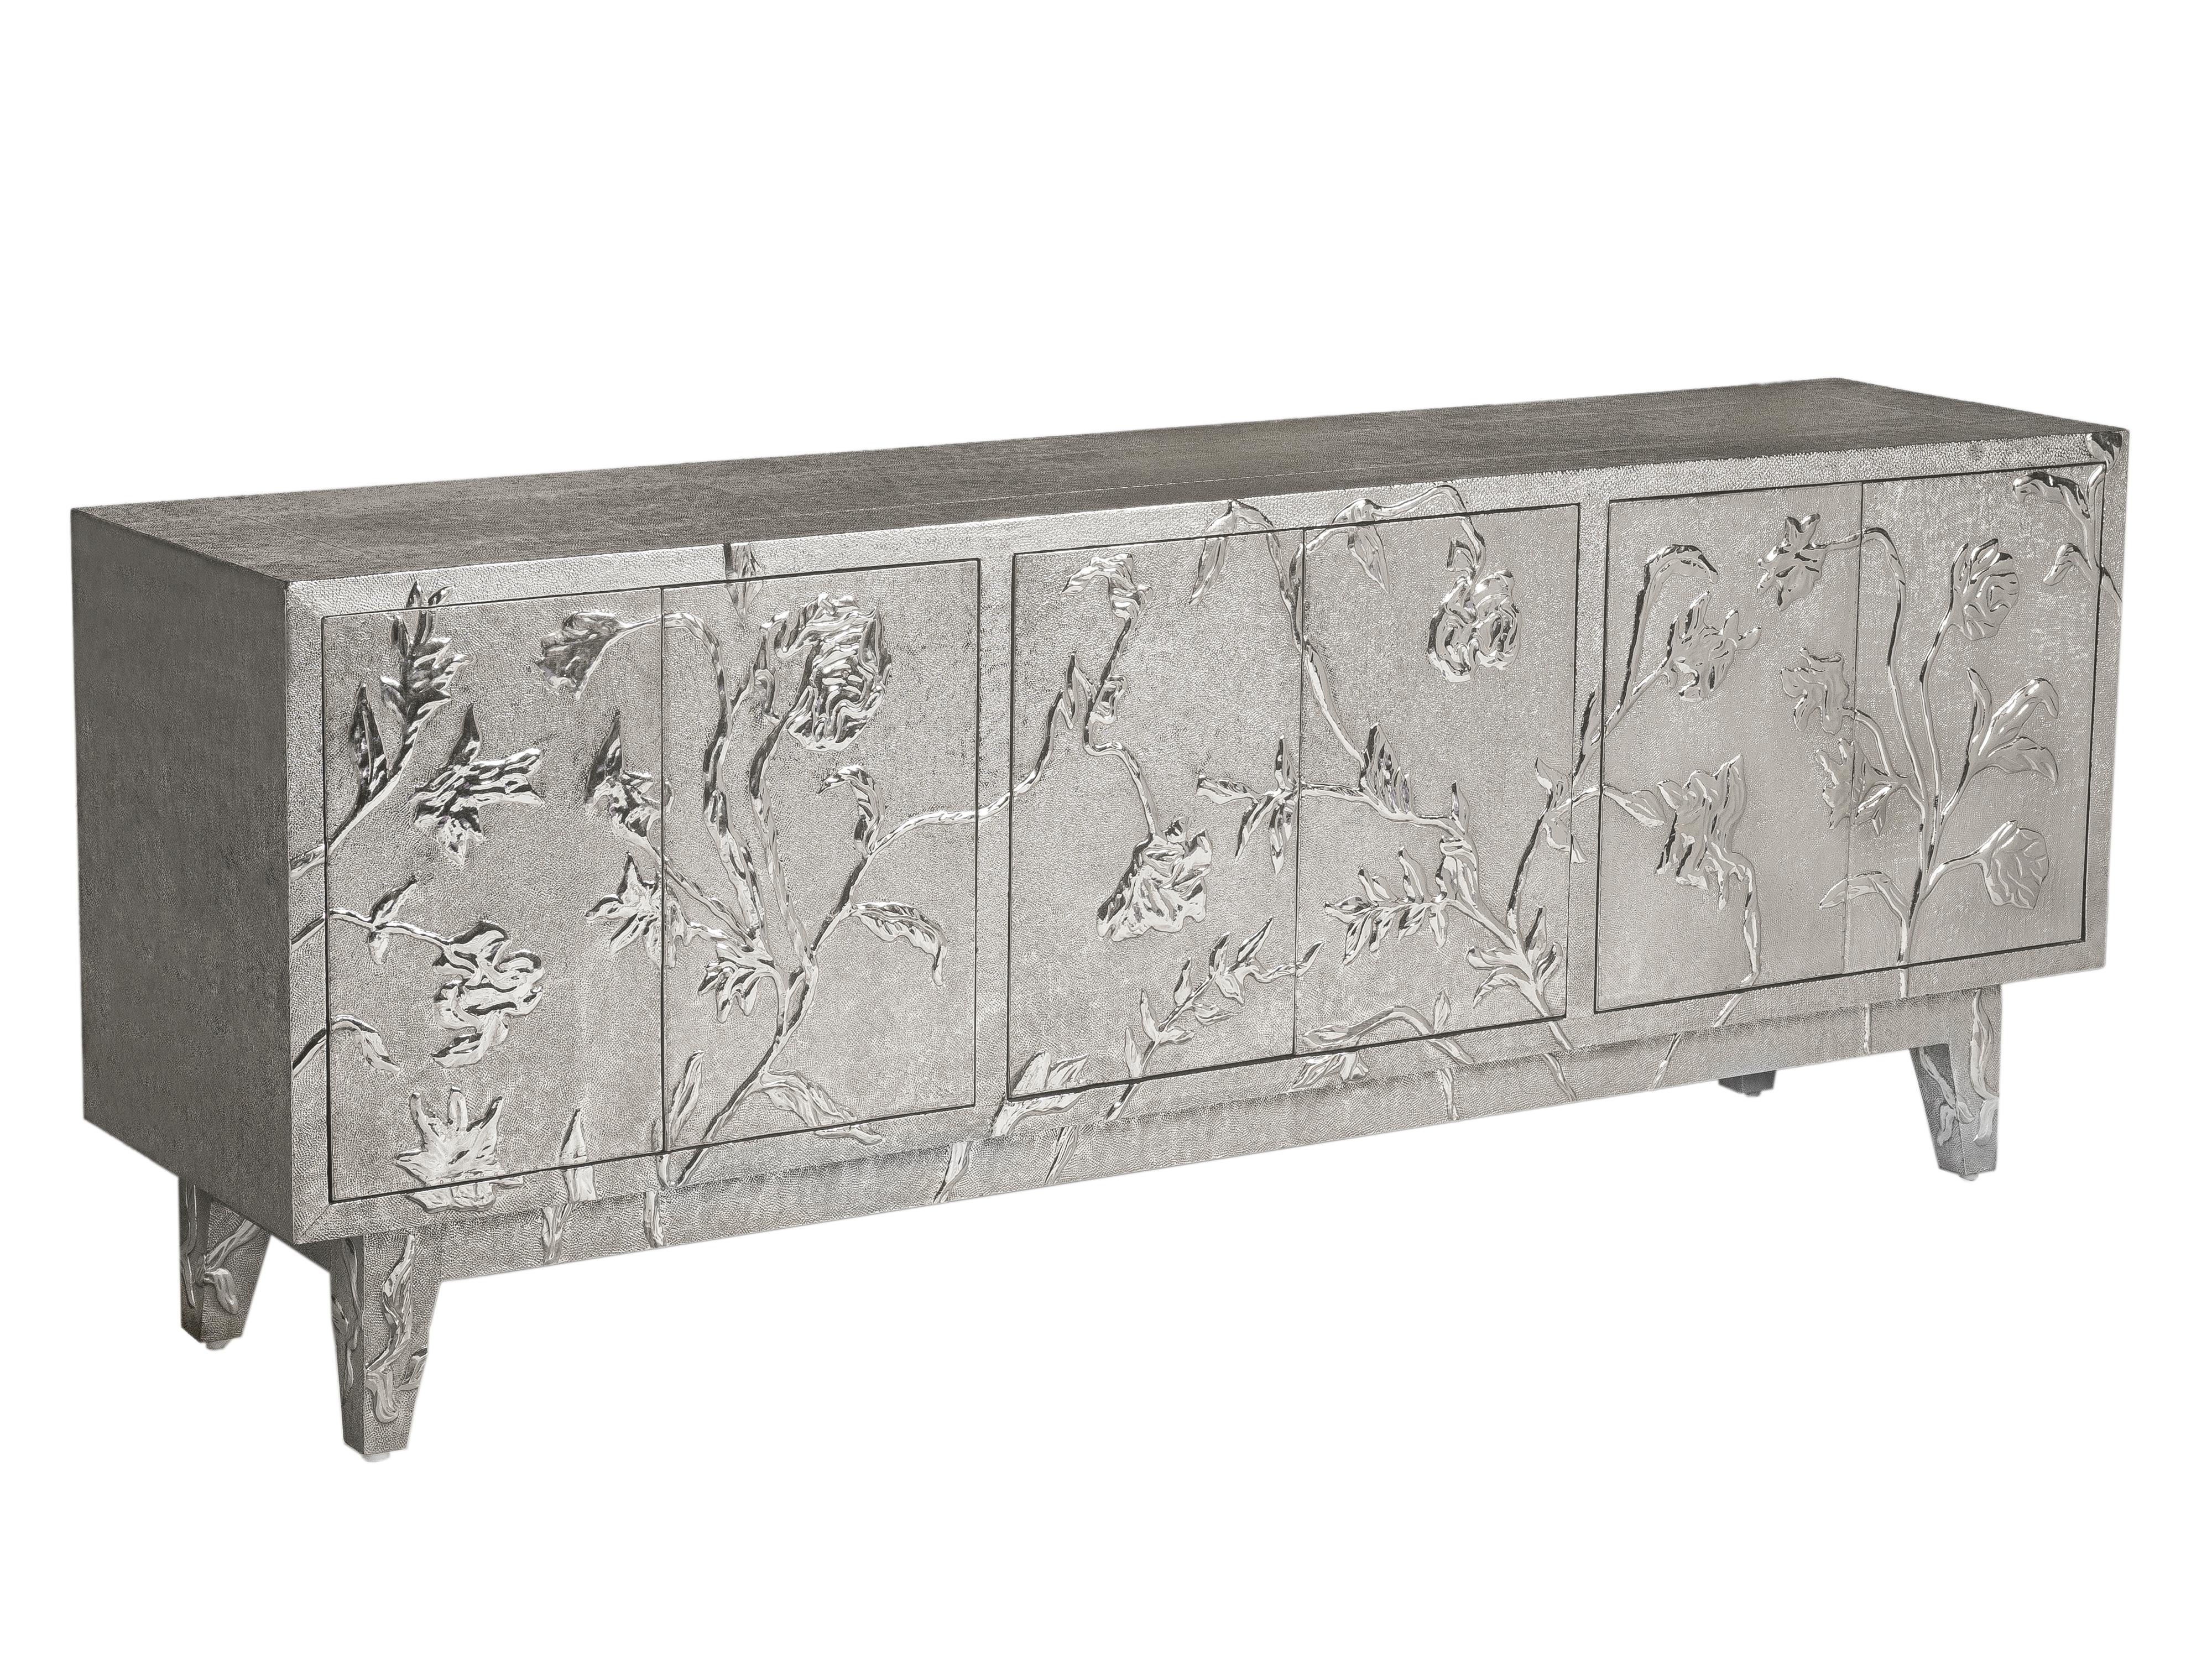 Contemporary Art Deco Credenza in Floral Design by Stephanie Odegard For Sale